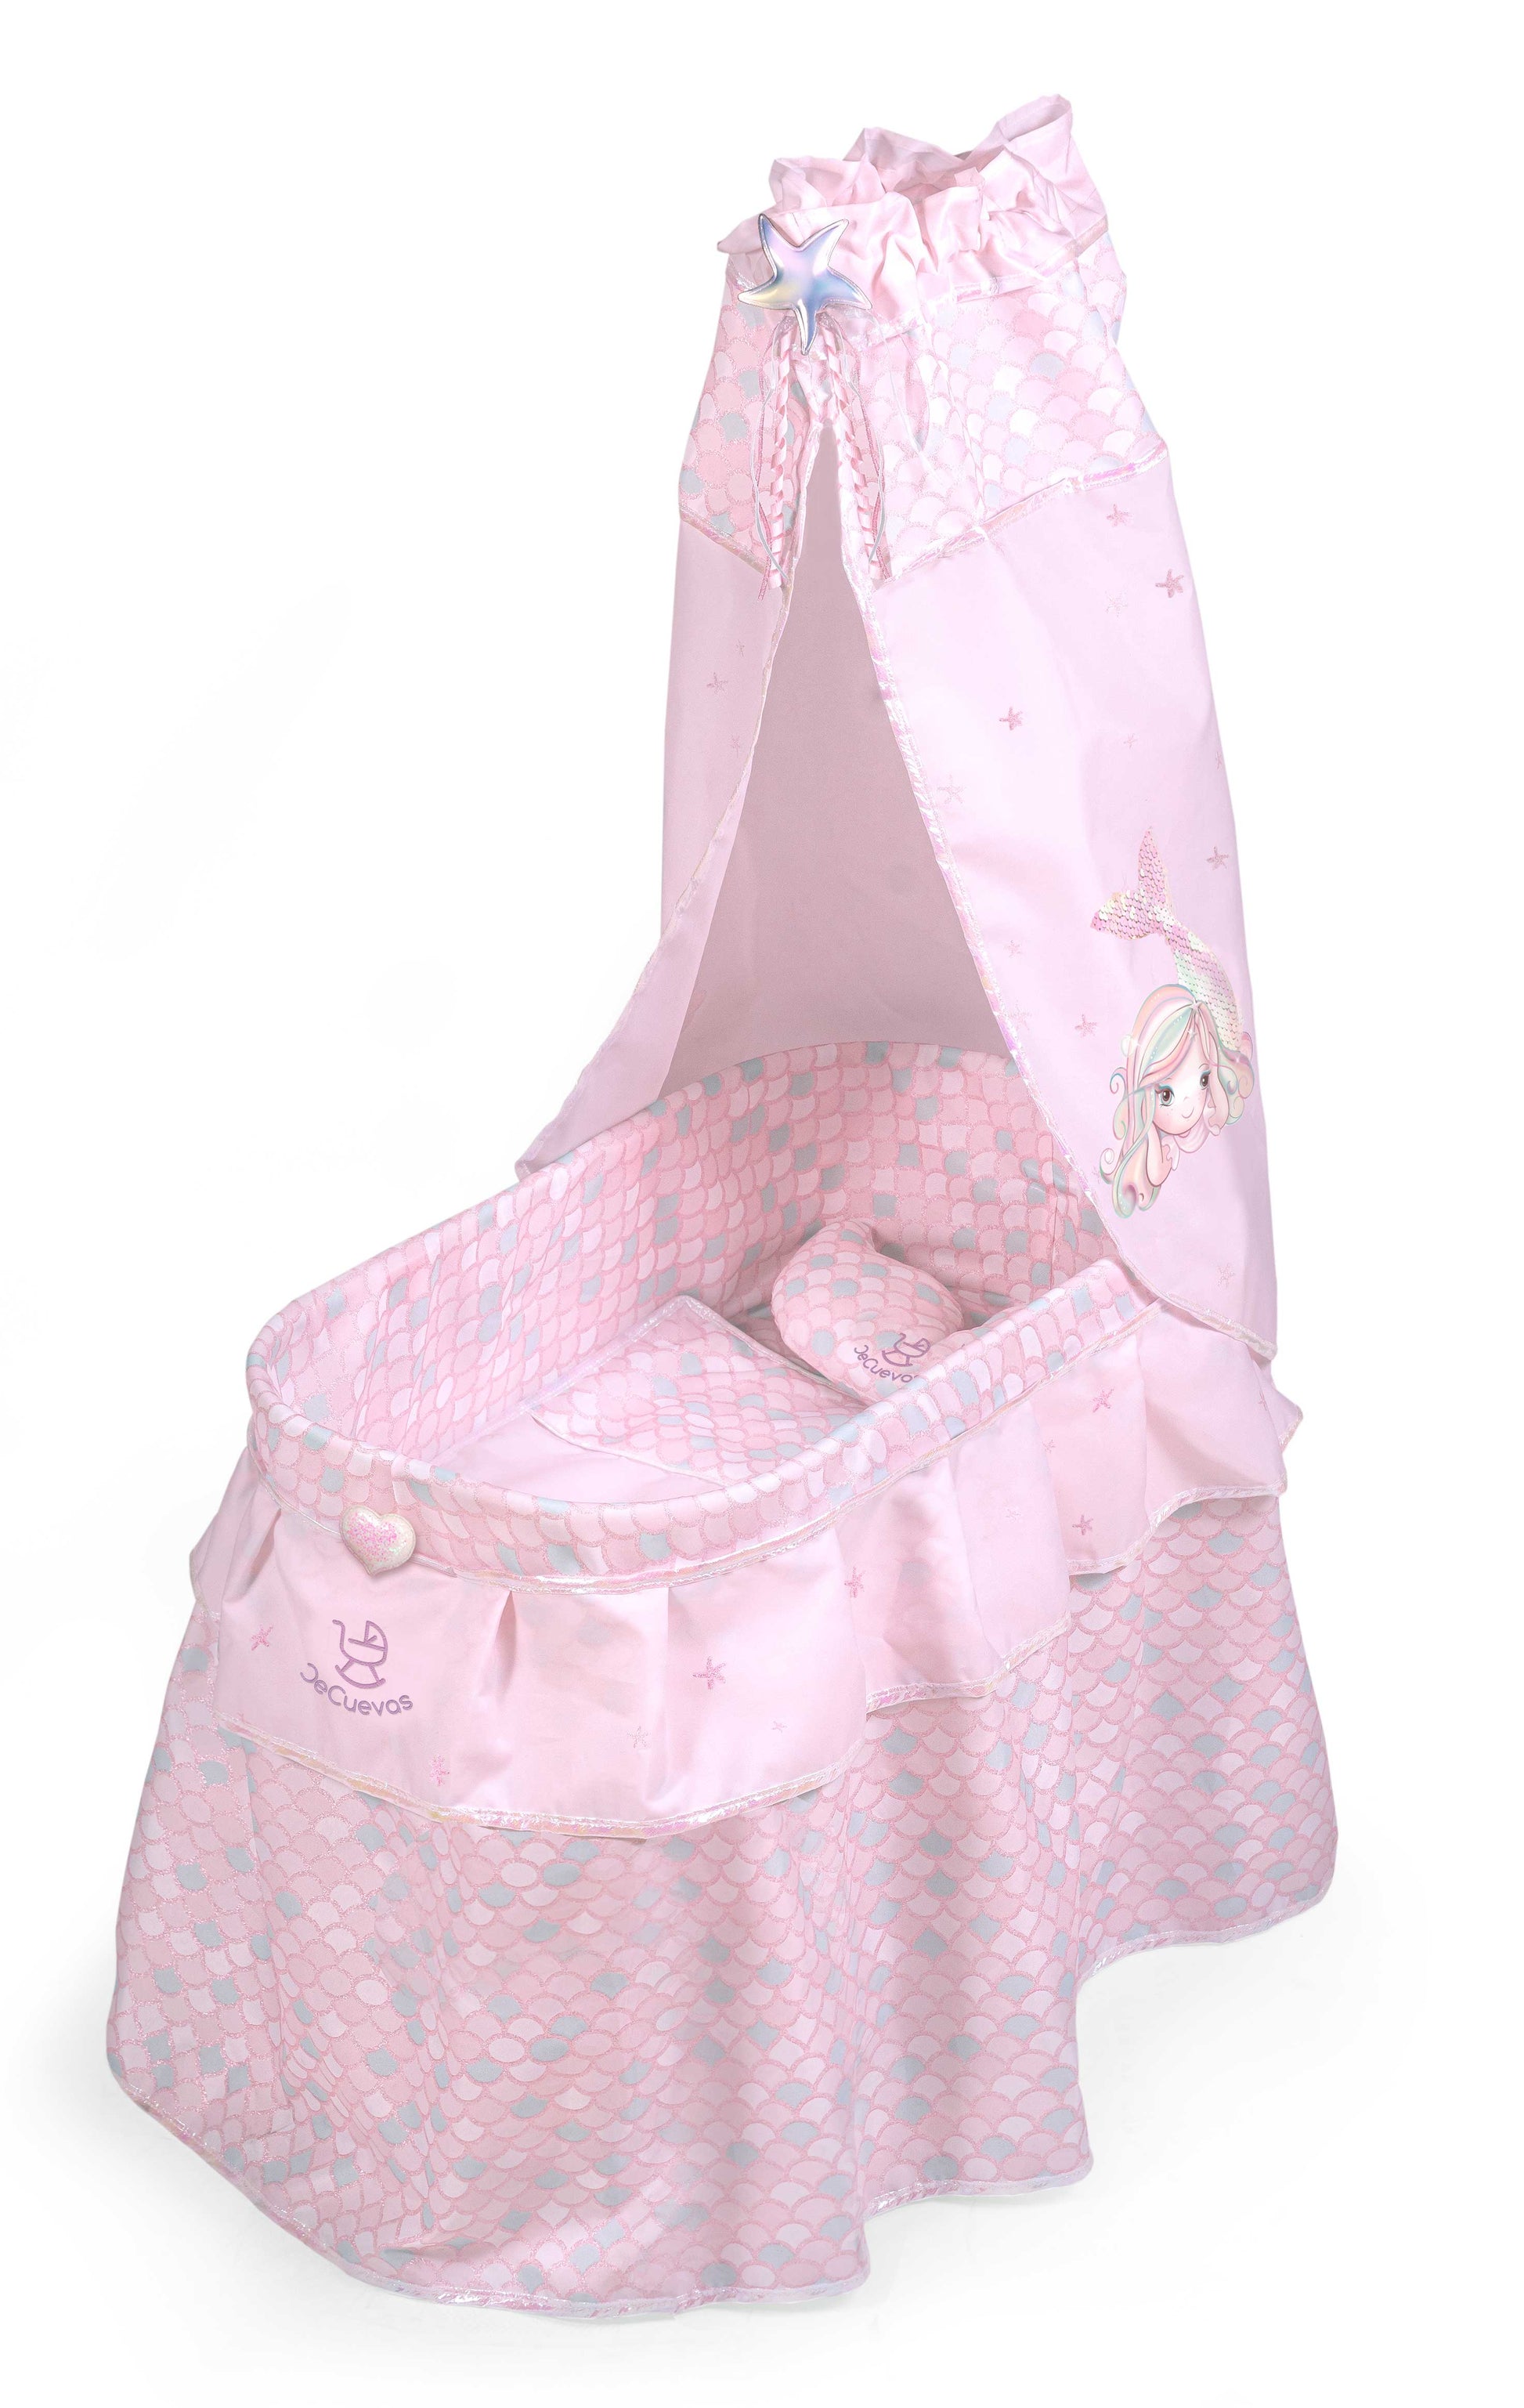 51041 Tall Pink Mermaid Crib/Cradle with Canopy (Ocean Fantasy) - Fallons Toys&Shoes - Decuevas